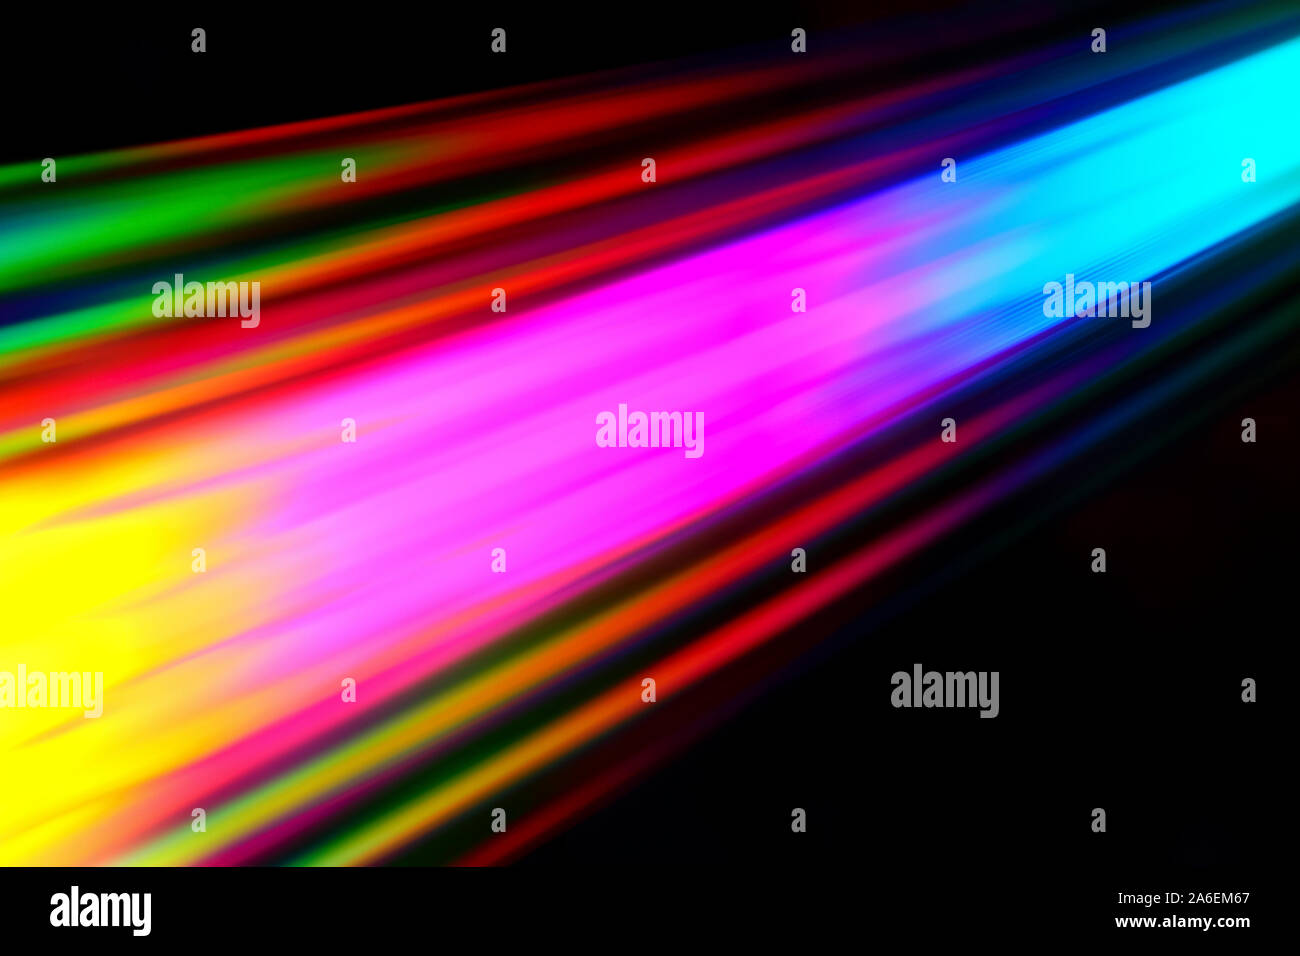 Colourfull burst of prismatic light creating lines of blured motion against a black background Stock Photo